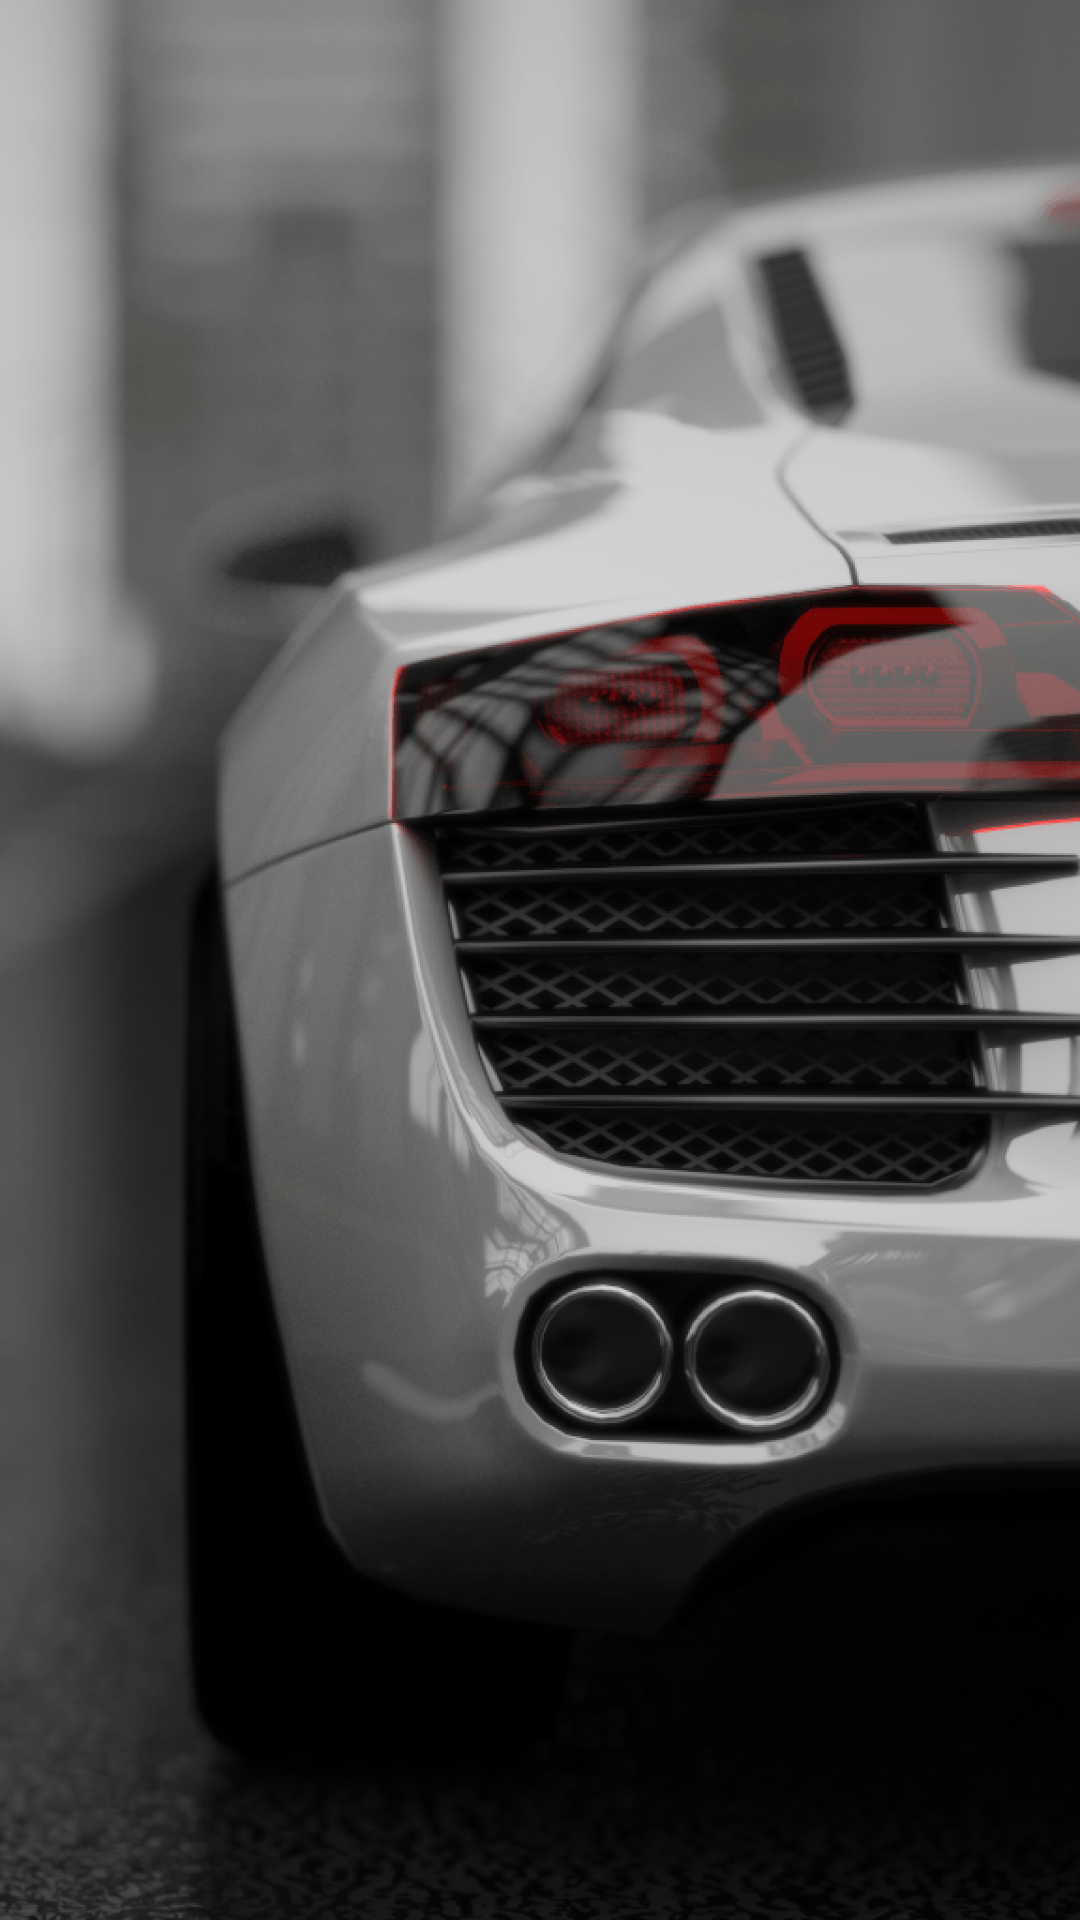 Audi R8 Speed IPhone Wallpaper  IPhone Wallpapers  iPhone Wallpapers